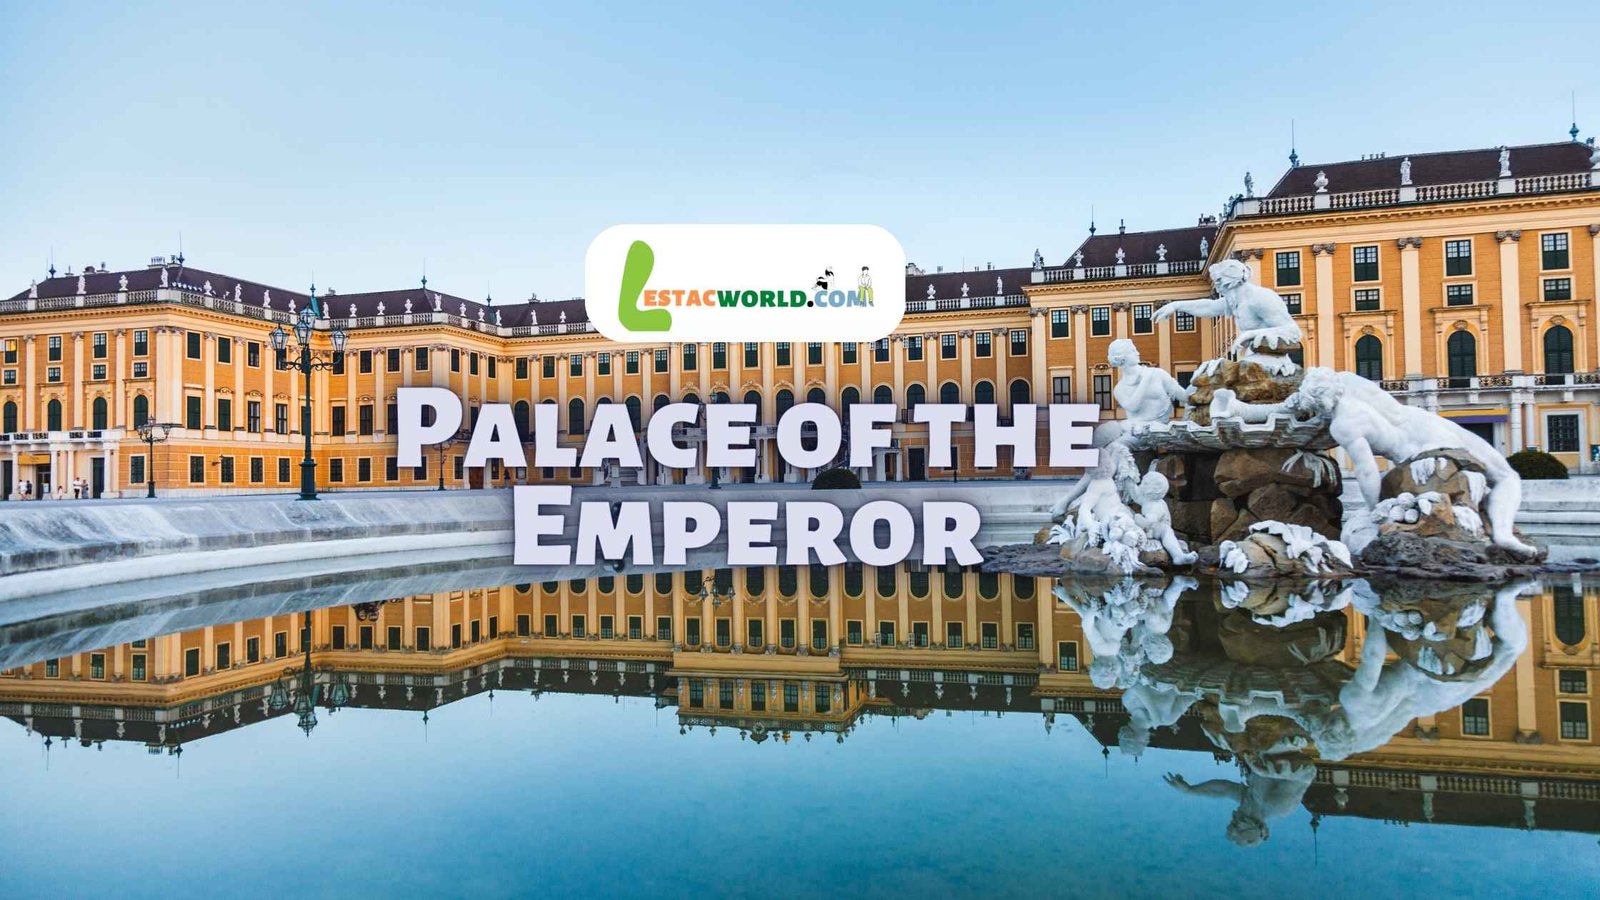 About Palace of the Emperor